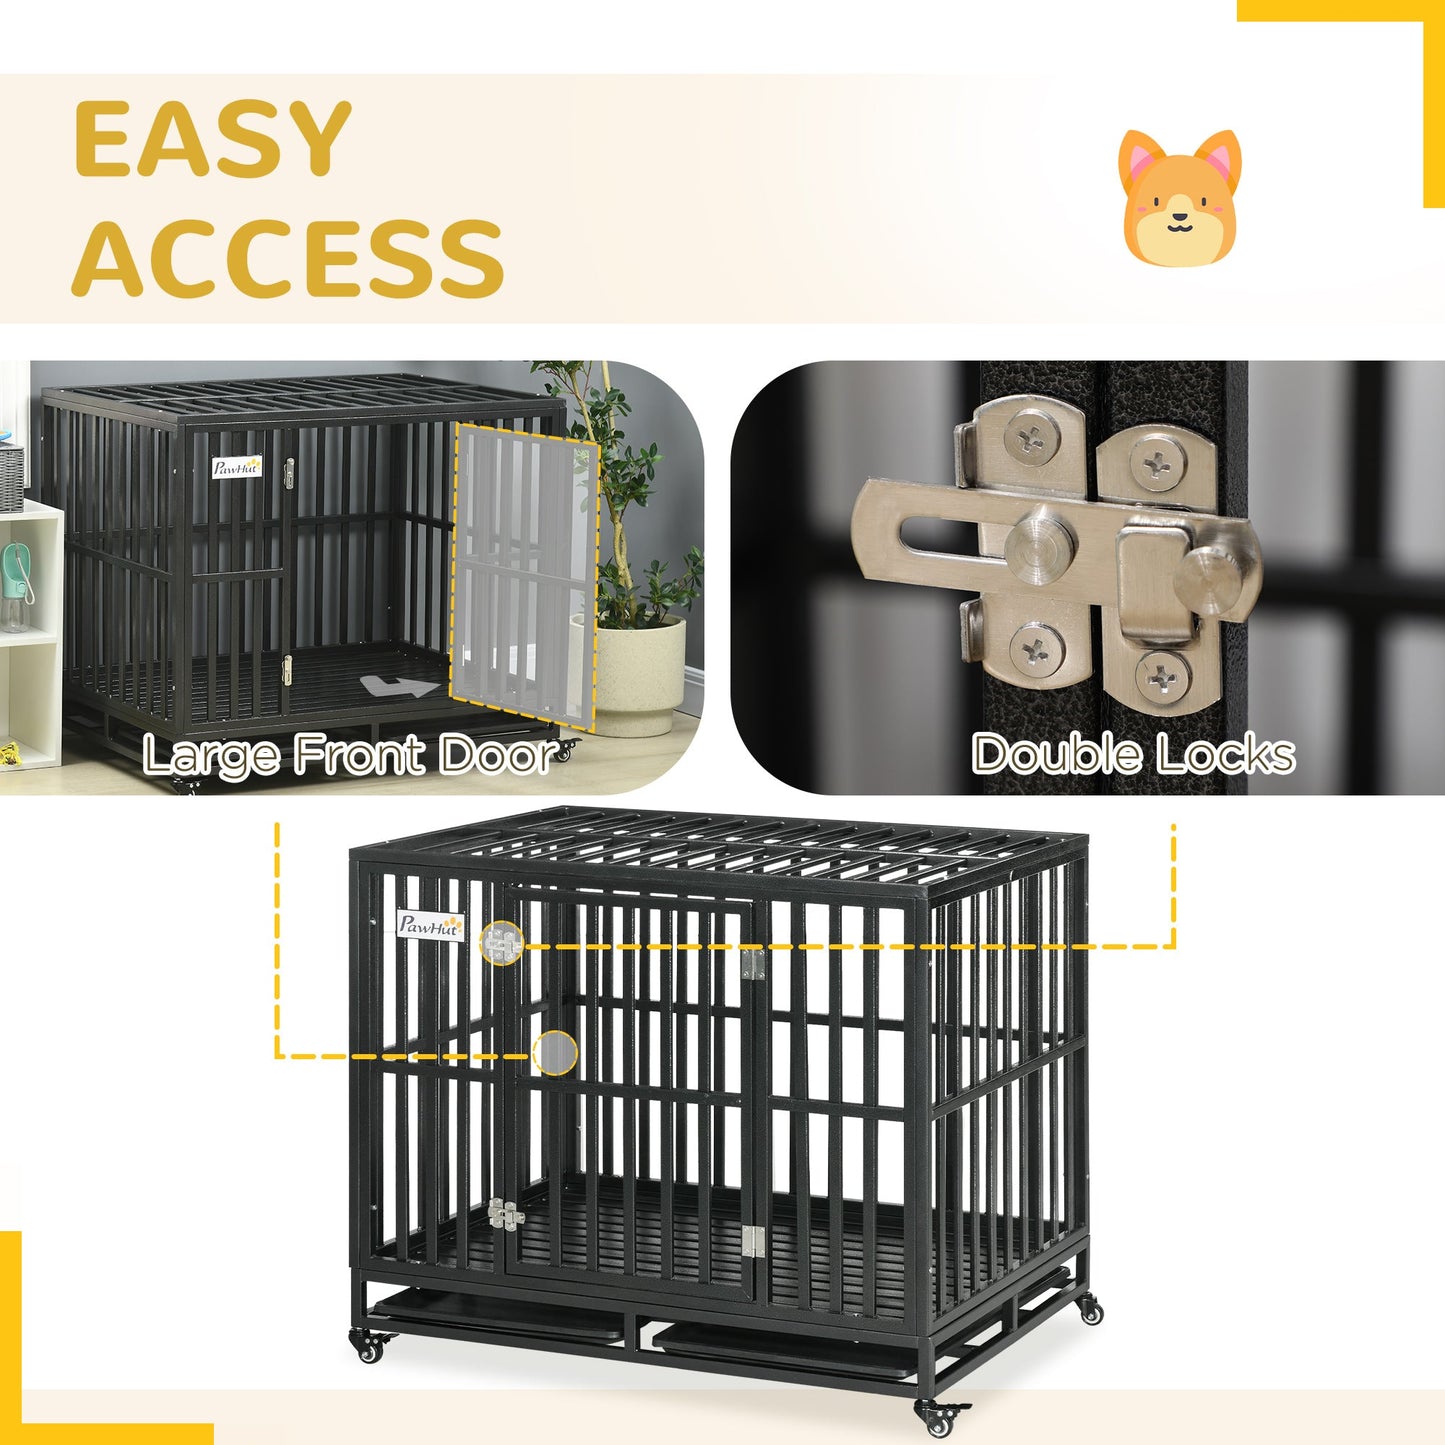 Pet Supplies-41" Heavy Duty Dog Cage, Metal Kennel Dog Crate Dog Playpen with Lockable Wheels, Slide-out Tray and Anti-Pinching Floor - Outdoor Style Company